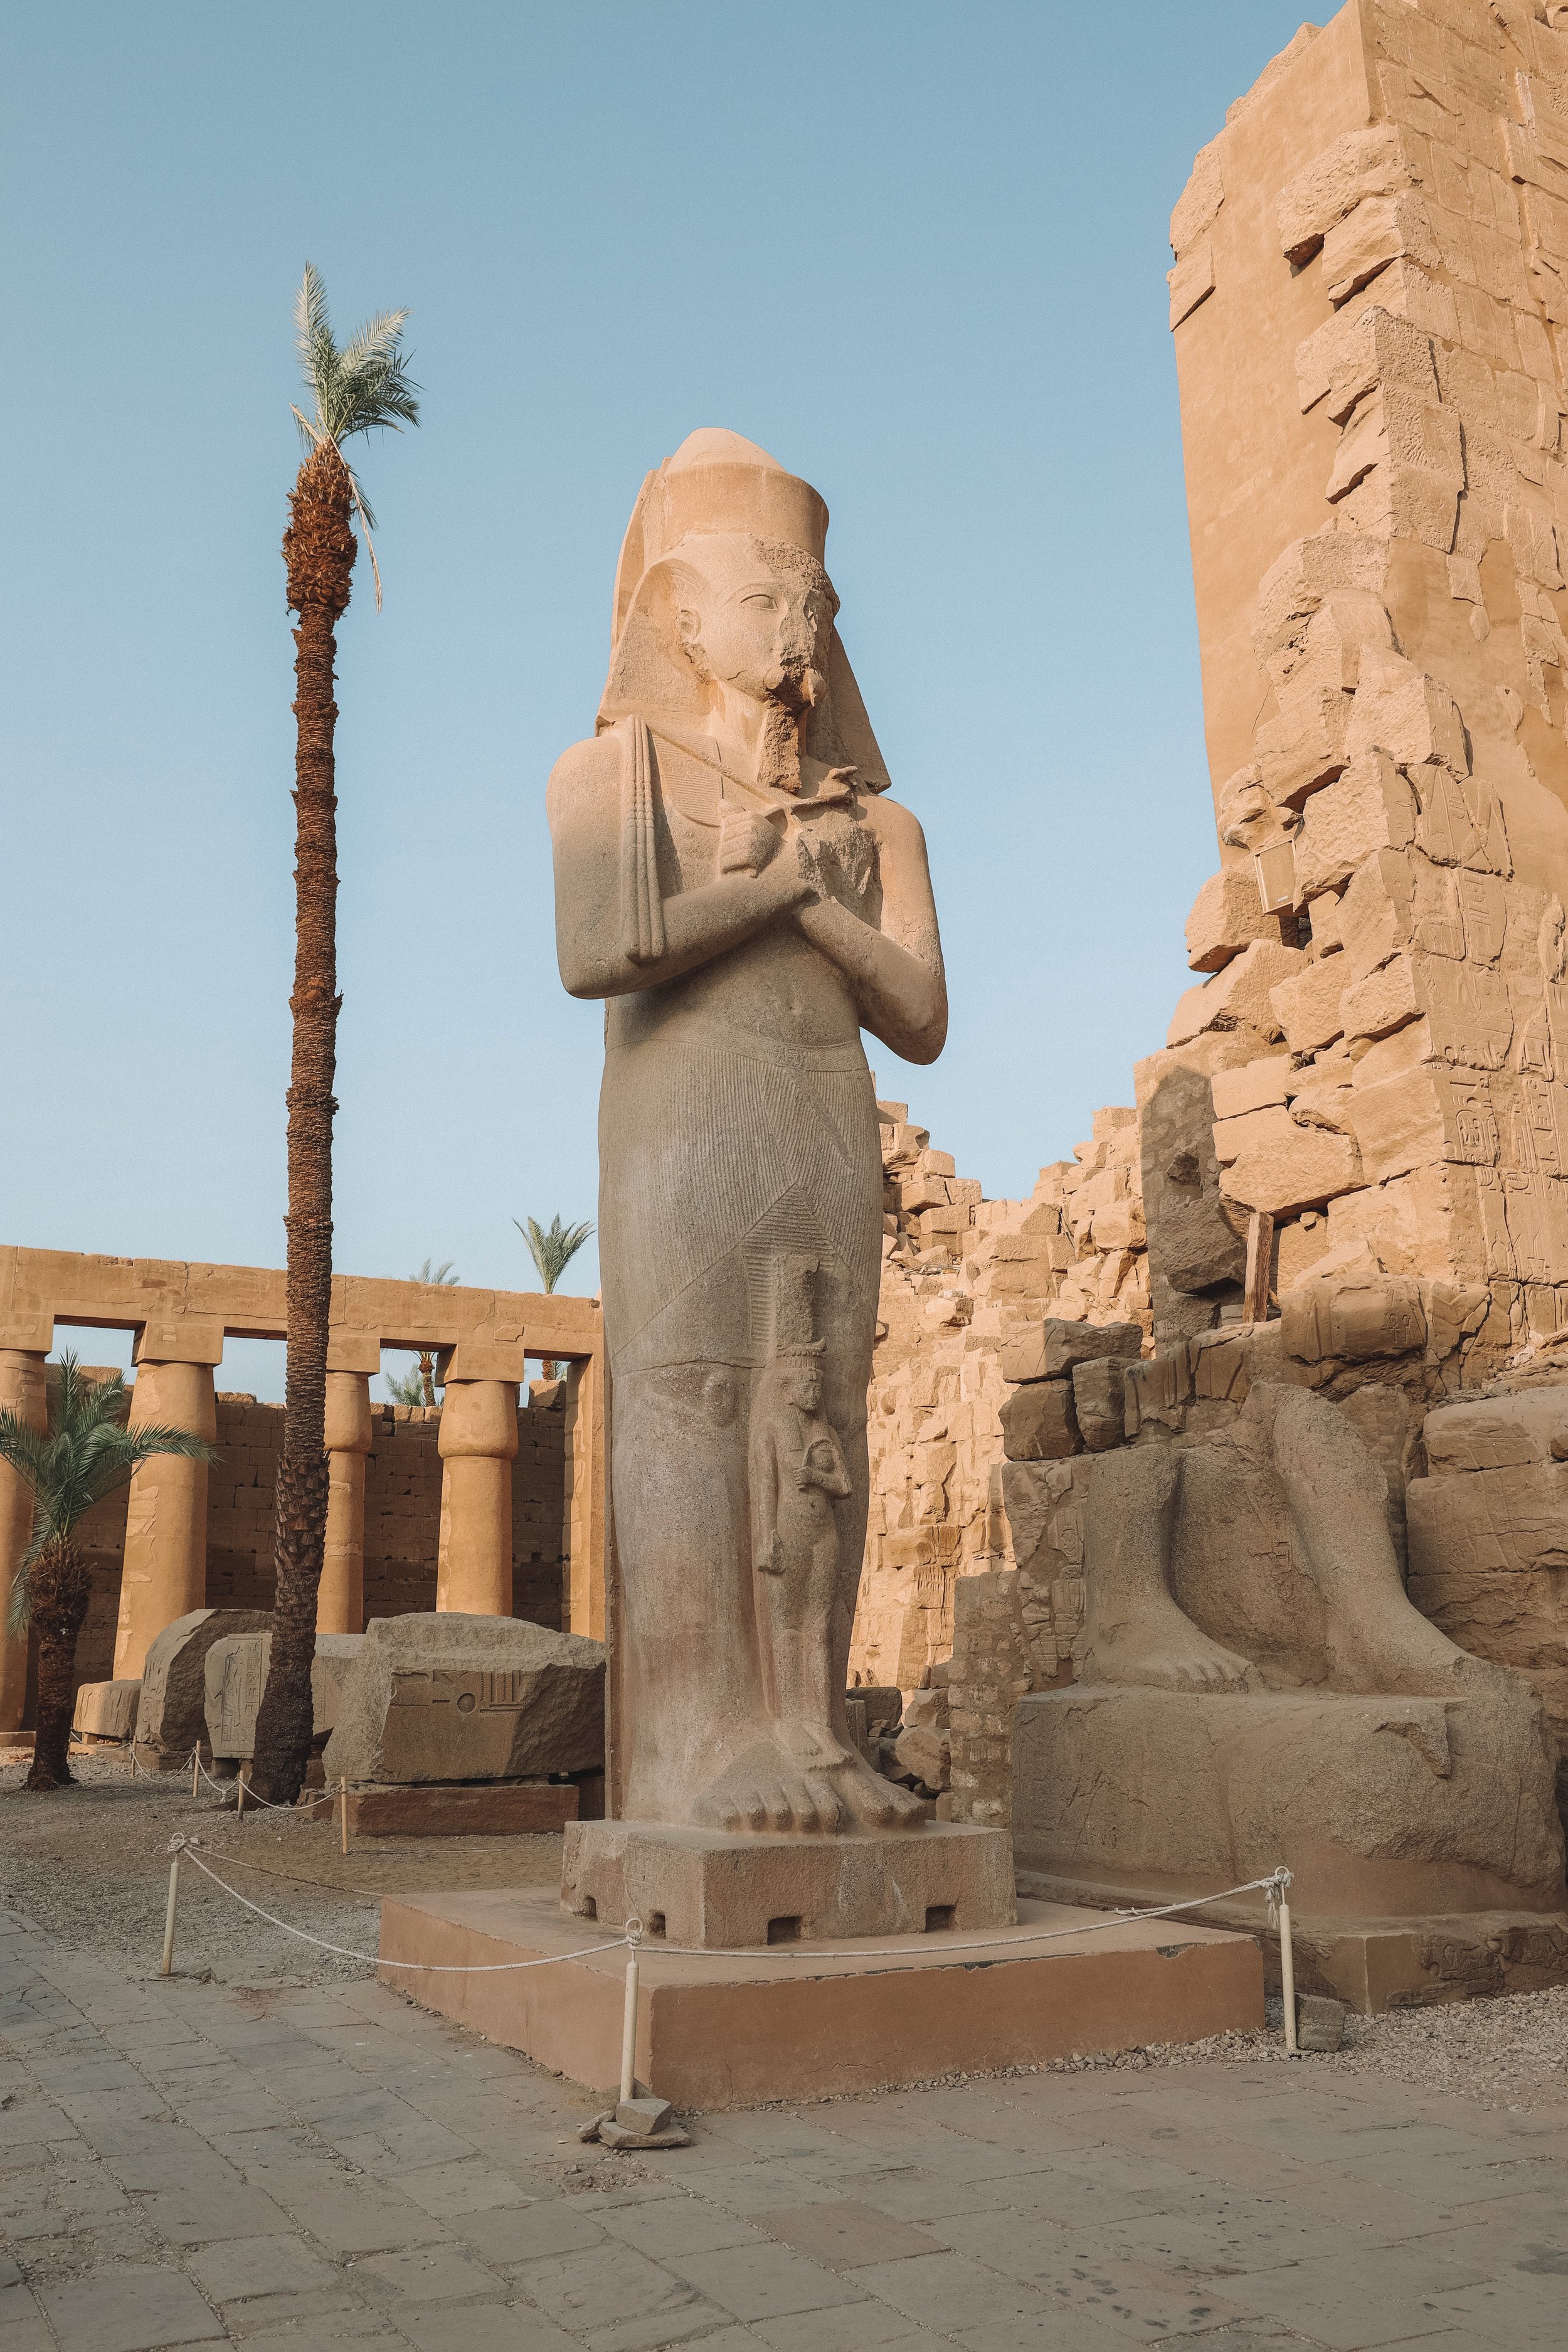 Another giant statue - Karnak Temple - Egypt